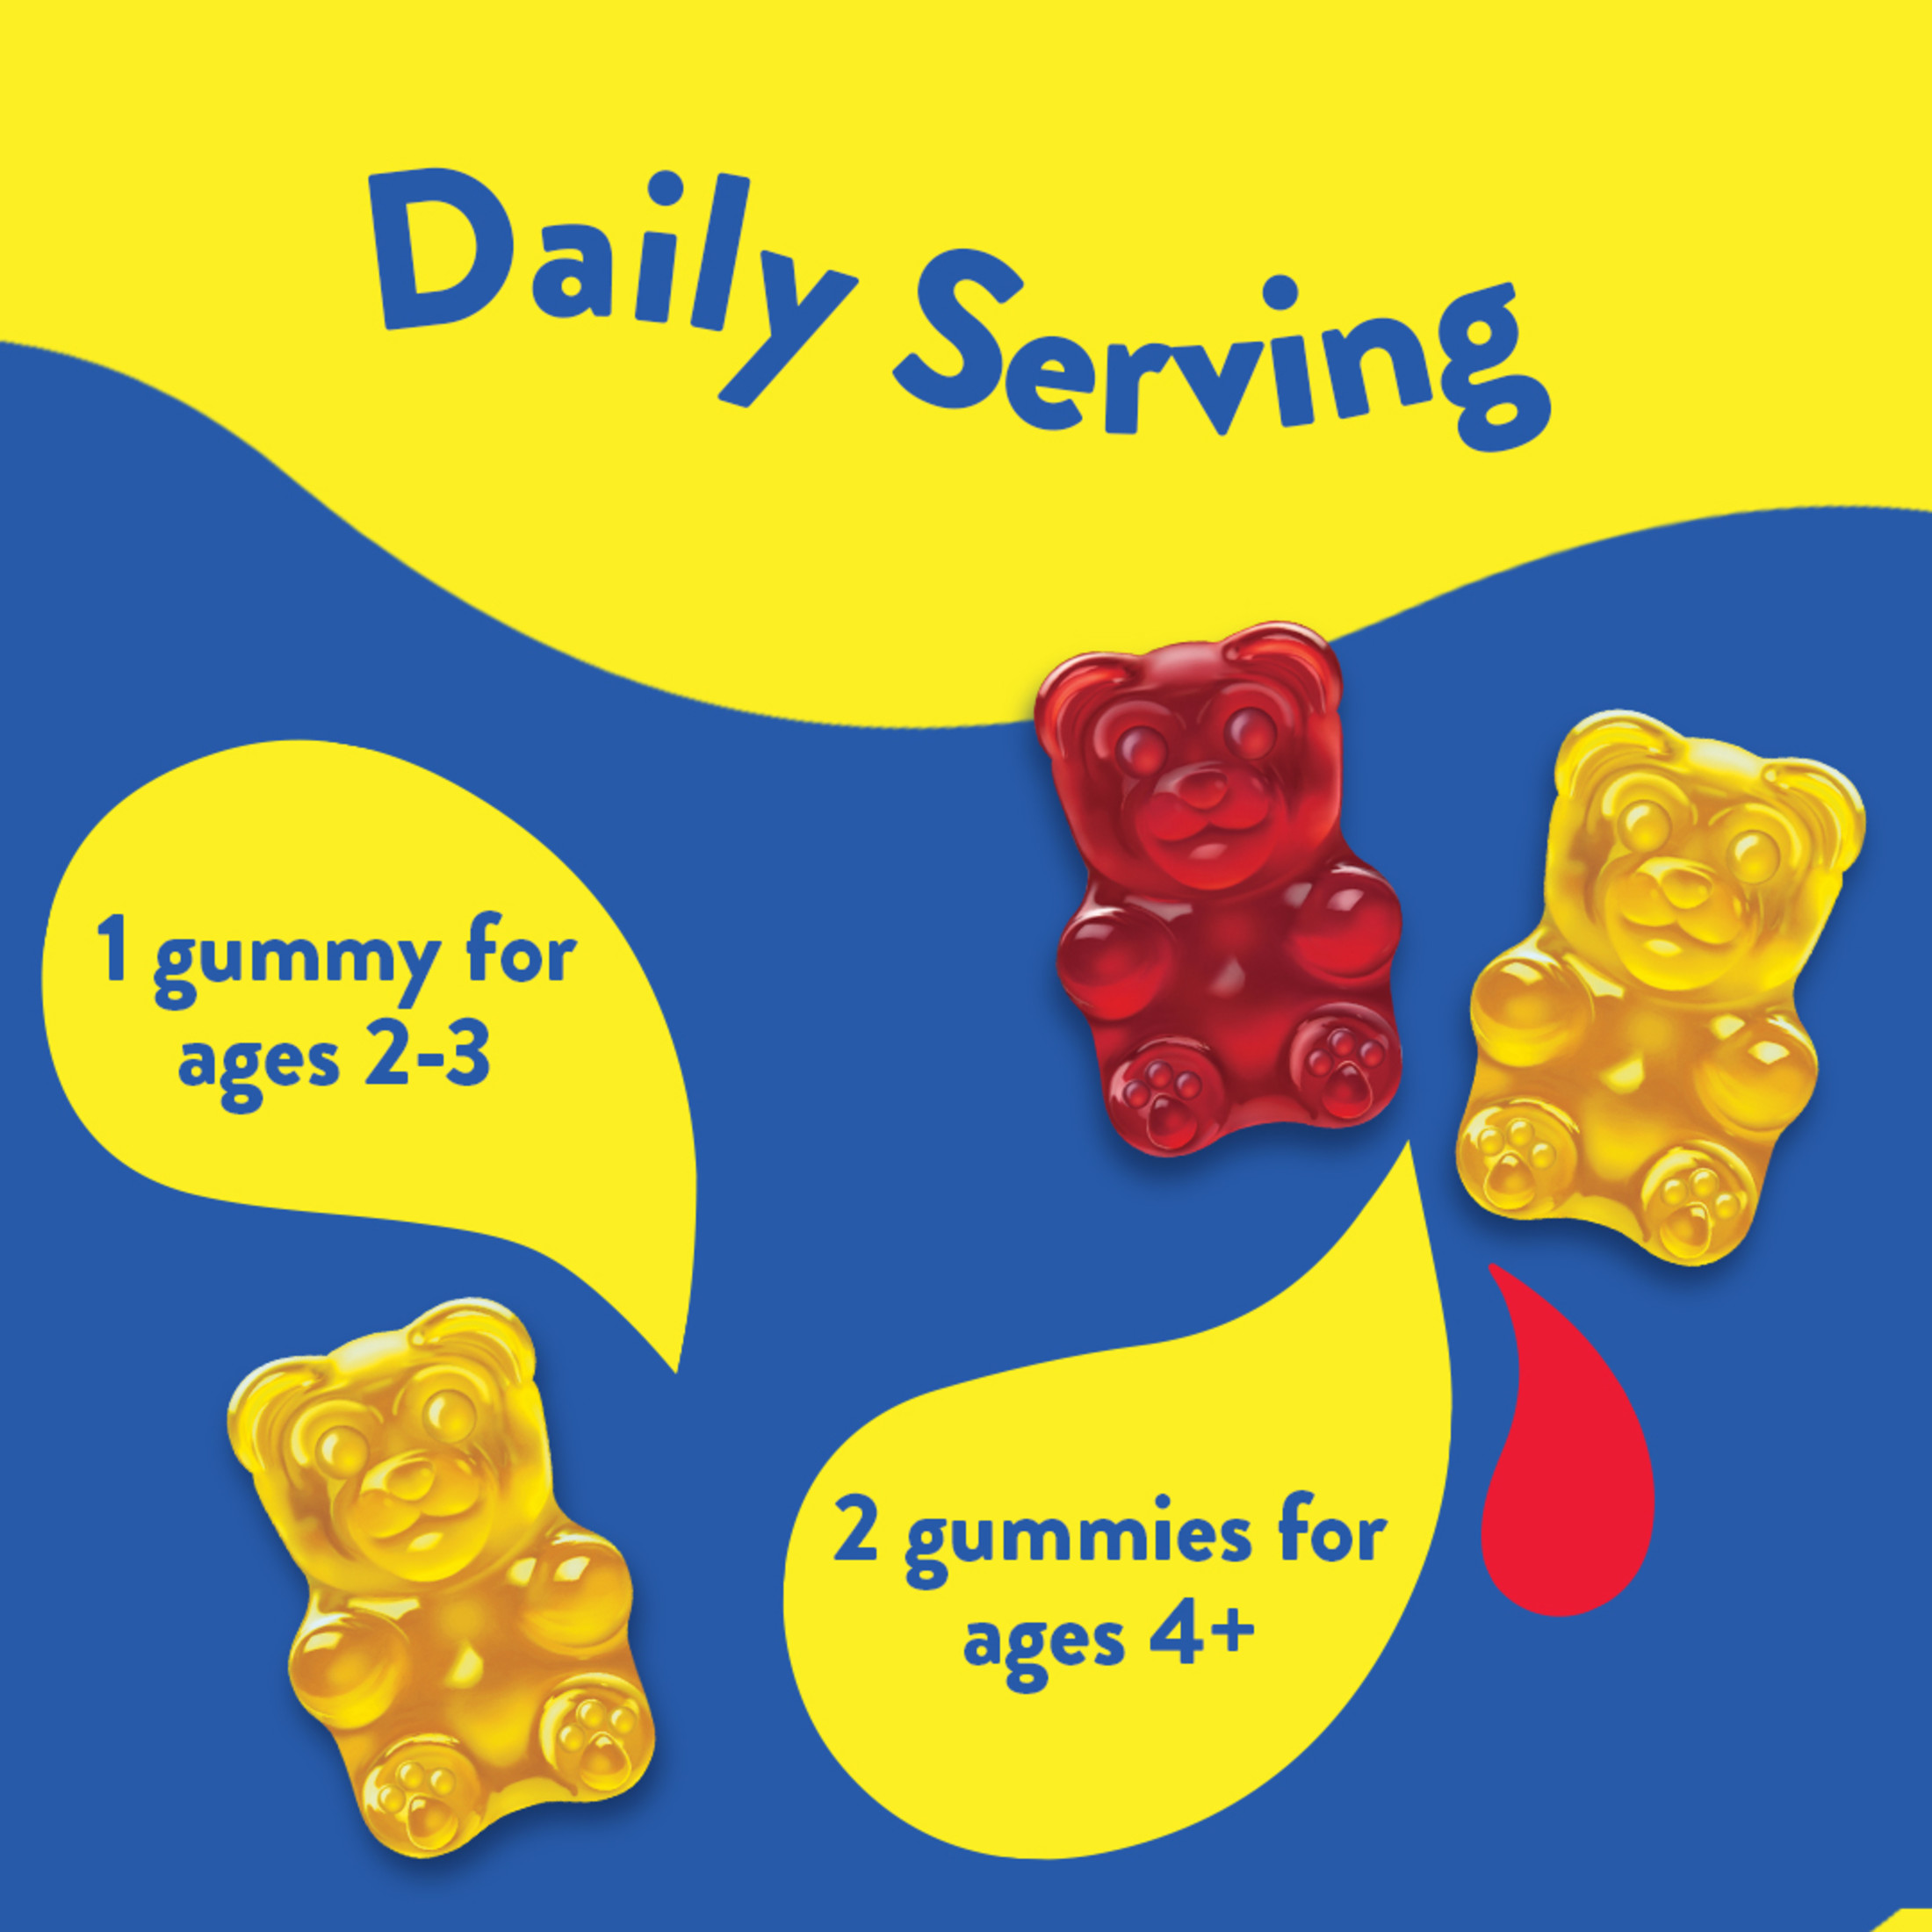 L’il Critters Gummy Vites Daily Gummy Multivitamin for Kids, Vitamin C, D3 for Immune Support Cherry, Strawberry, Orange, Pineapple and Blueberry Flavors, 190 Gummies - image 5 of 9